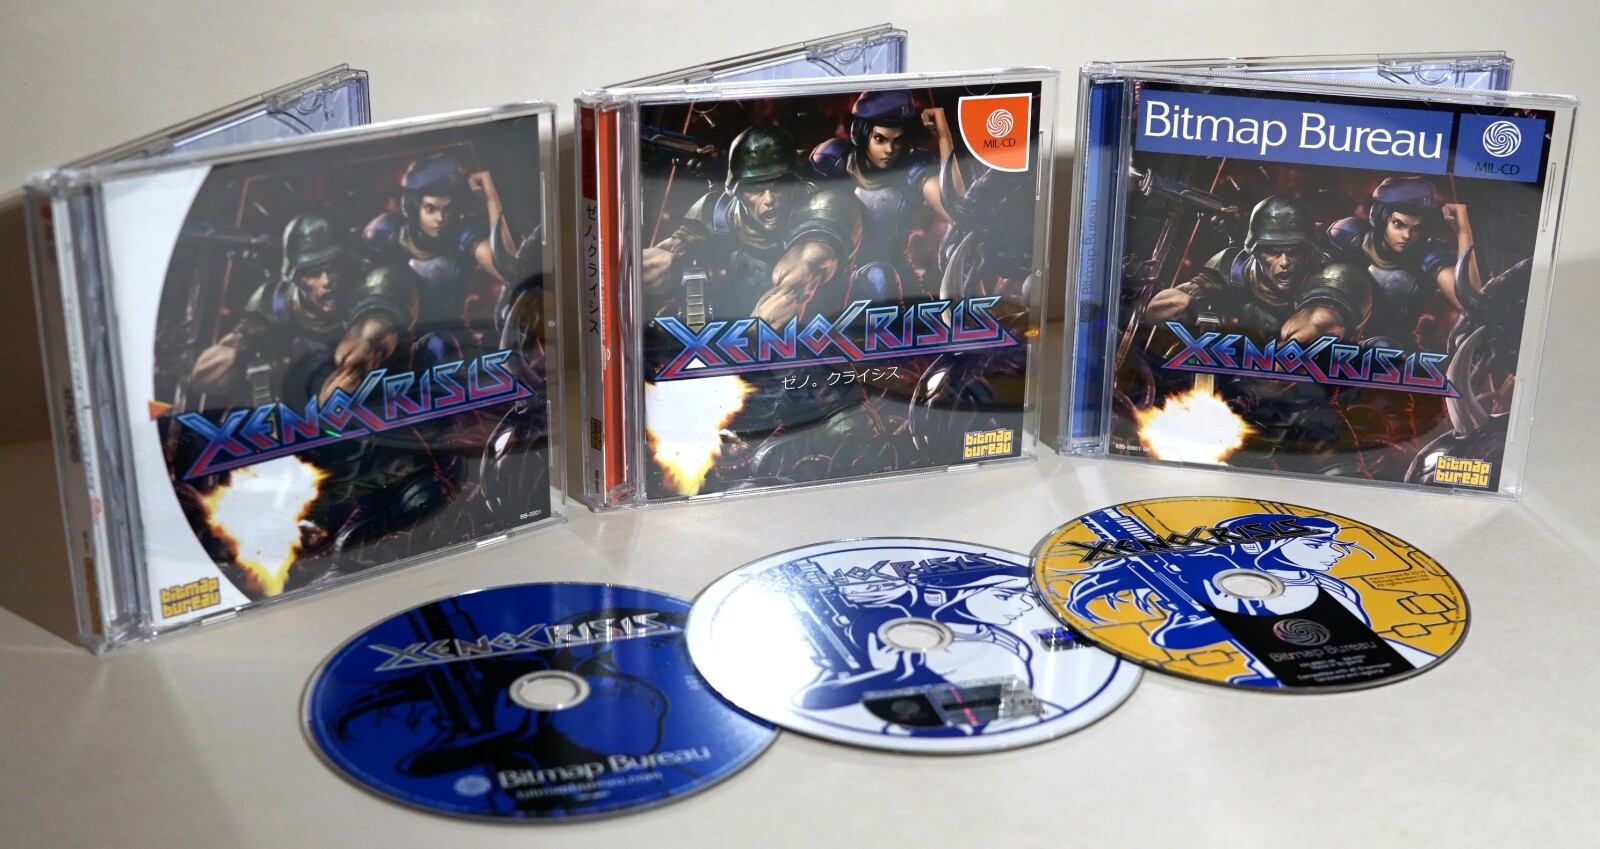 Xenocrisis, a new game for the Dreamcast